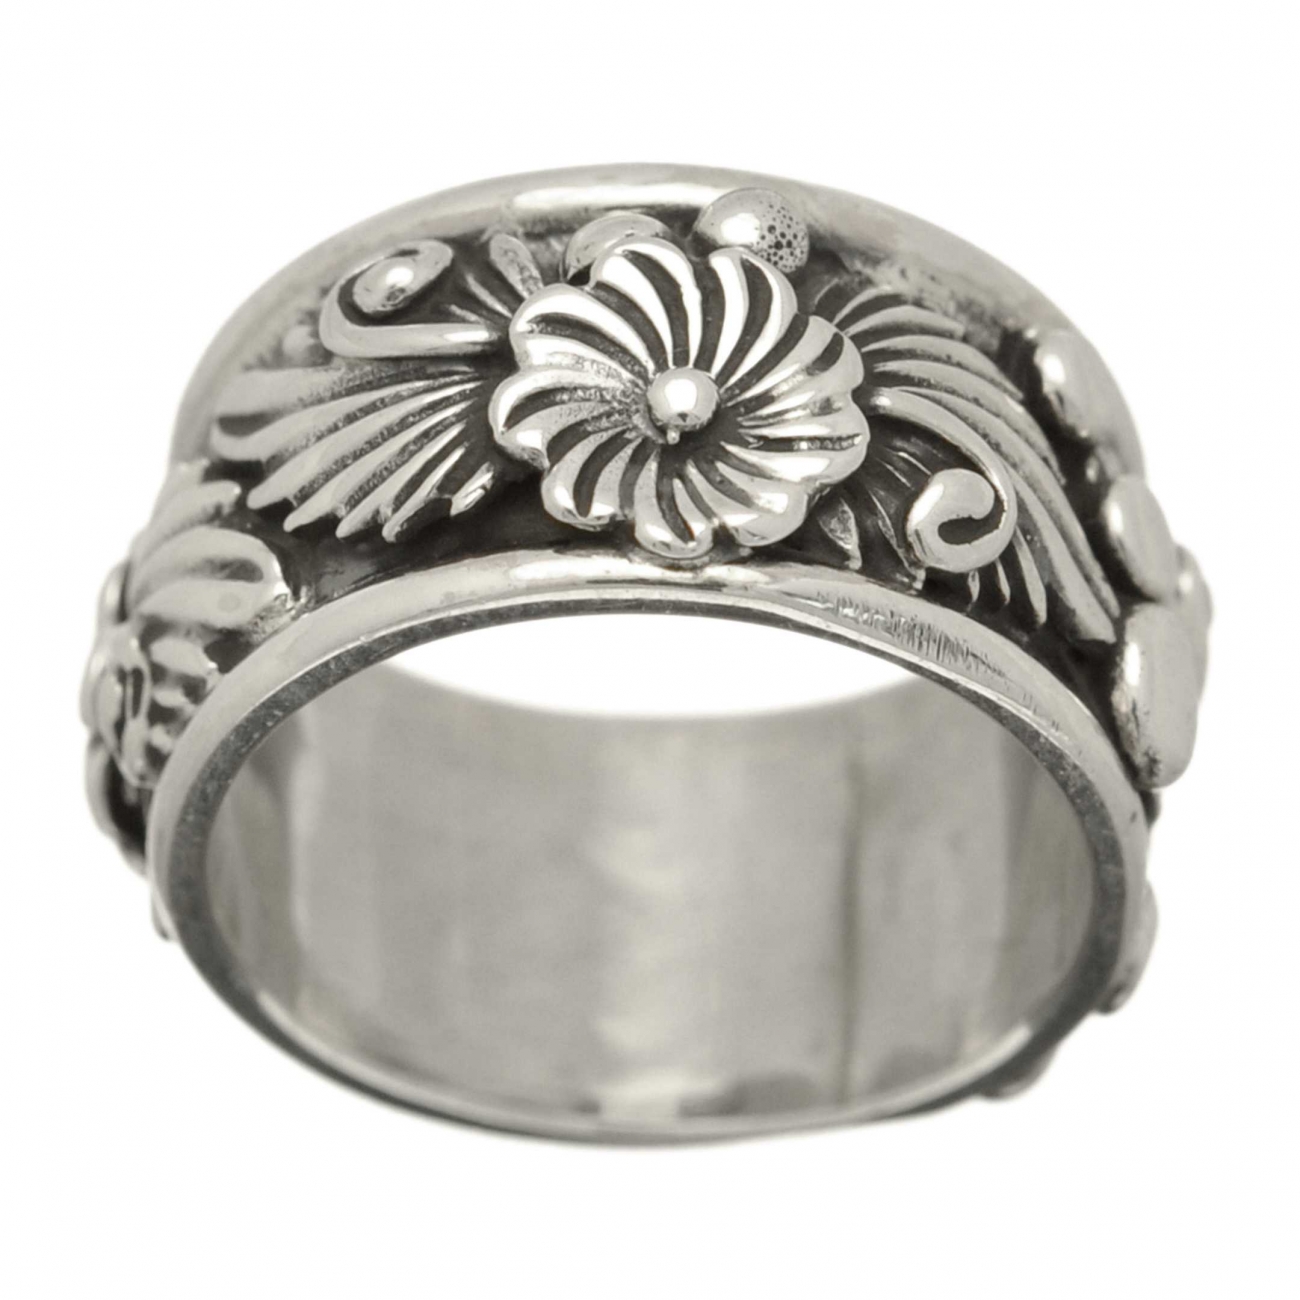 Unisex Navajo ring in silver with flowers - Harpo Paris